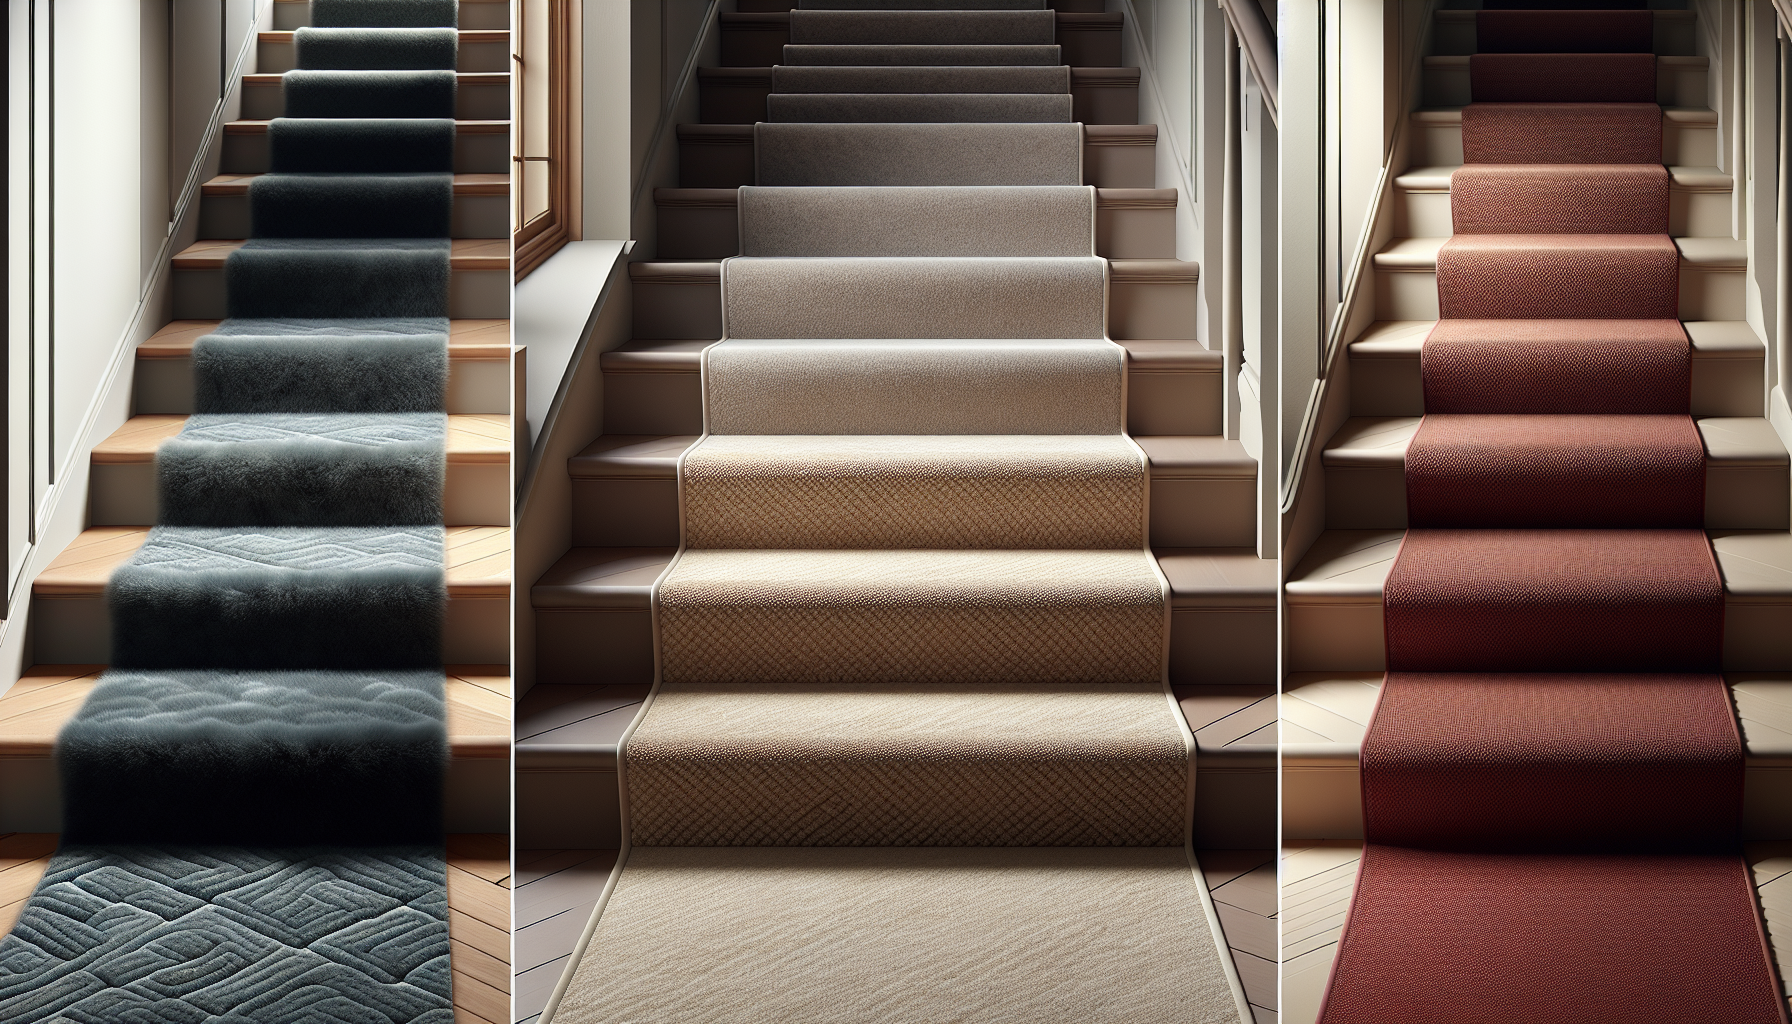 Choosing the right material for stair runners